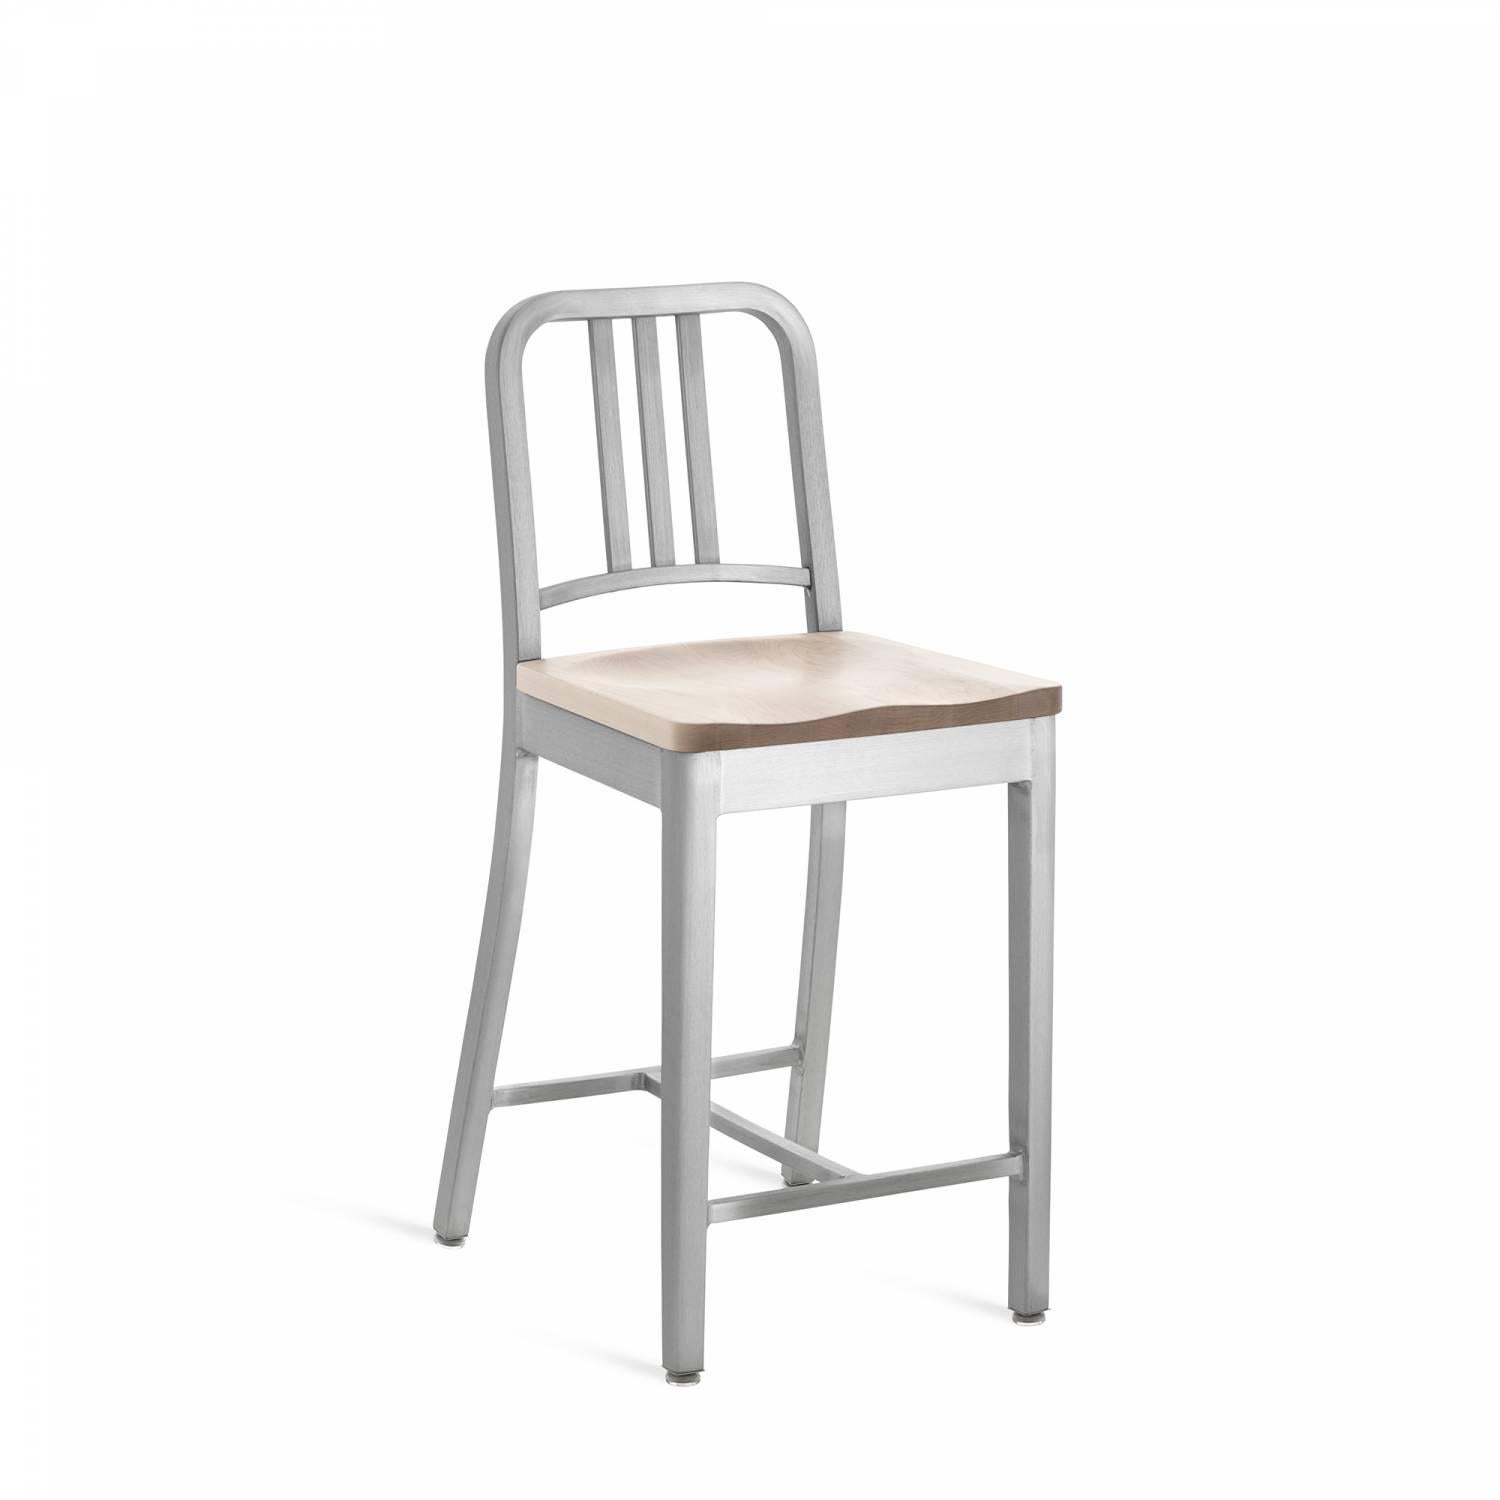 First built for use on submarines in 1944, the Navy Chair has been in continuous production ever since. With the famous 77 step process, our craftsmen take soft, recycled aluminum, hand form and weld it- then temper it for strength. Finally, the